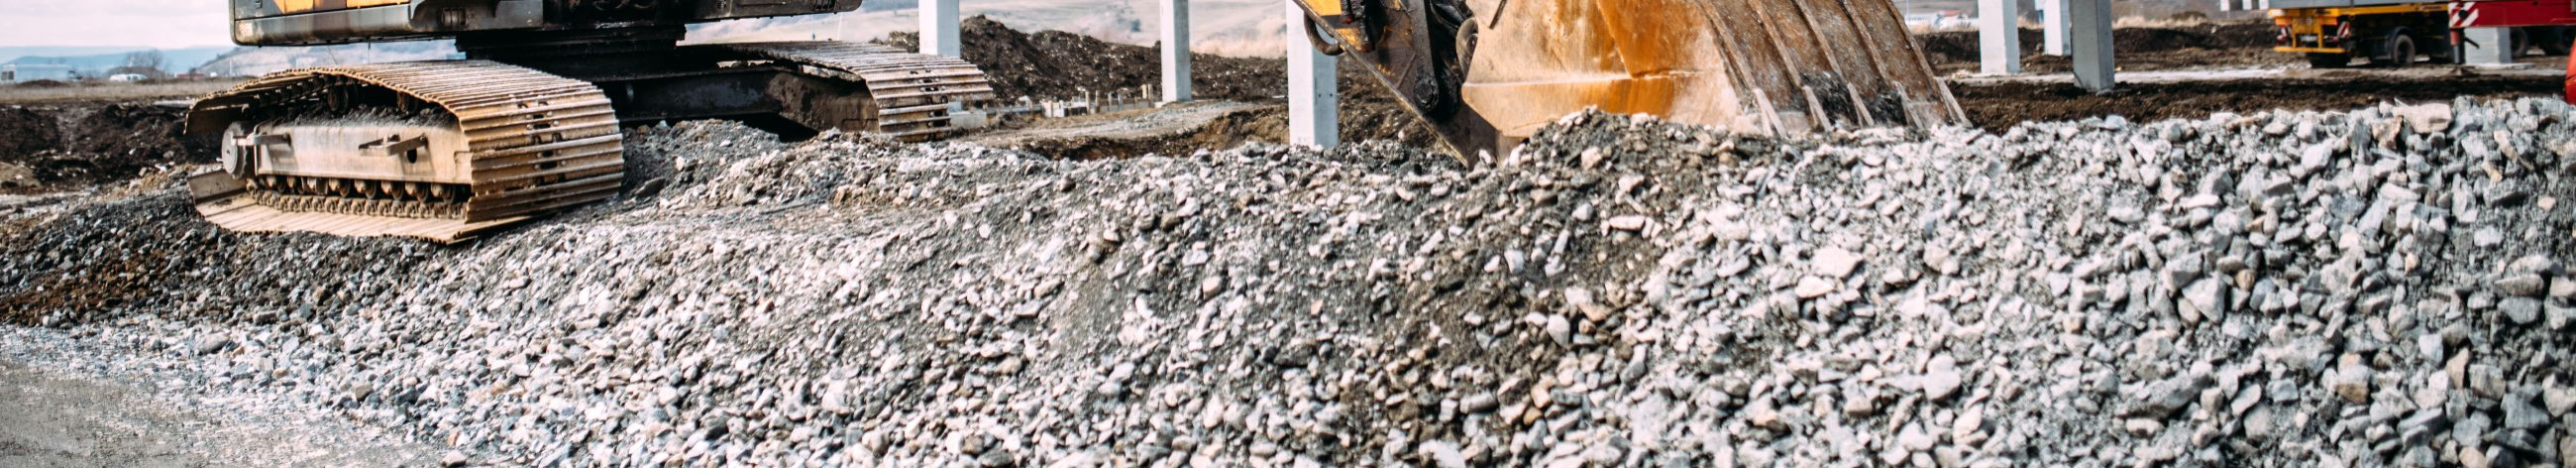 excavation and soil work, soil works, sand quarries, excavation work, sand extraction, land excavation, soil leveling, groundwork services, soil work contractors, sand quarry operations